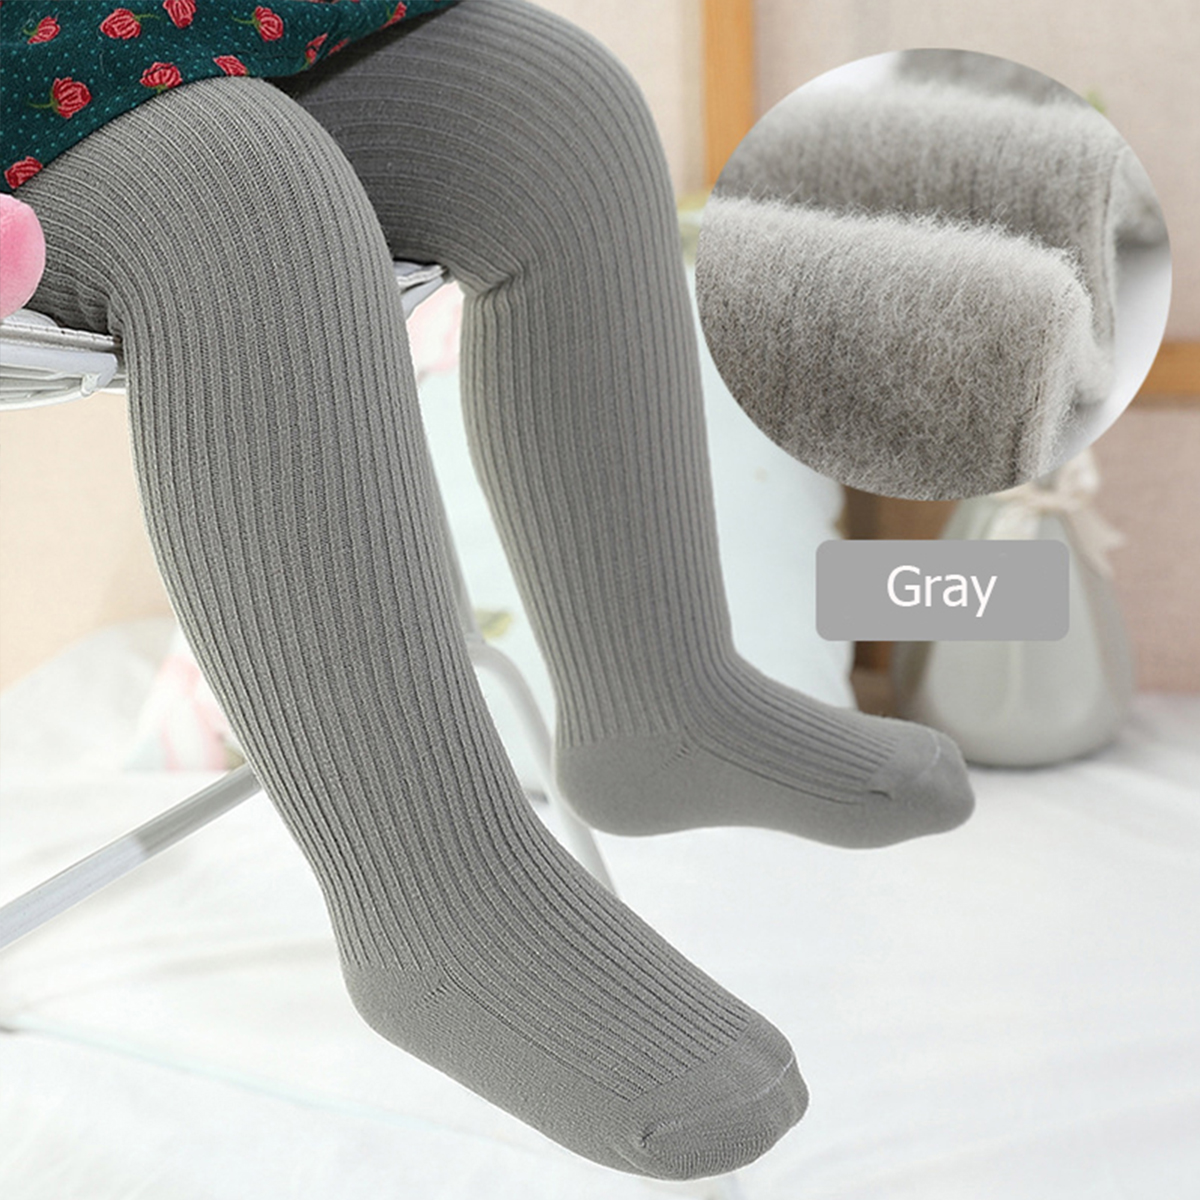 Riolio Brushed cloth Footless LEGGINGS Tights for 0-6 Years Old Girl Wholesale